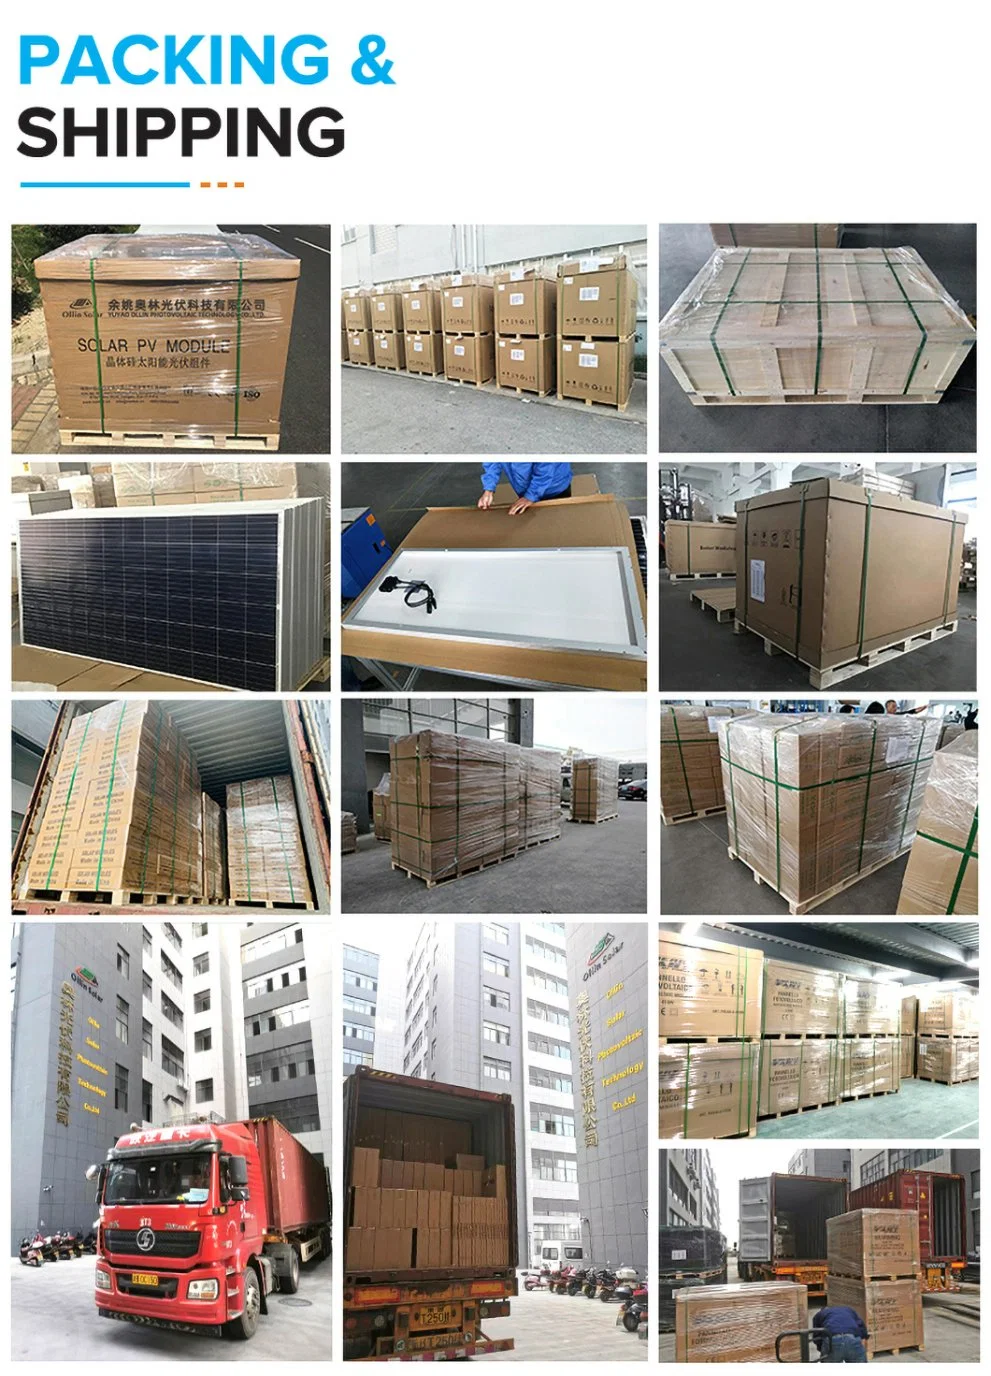 China Factory 440W 445W 450W 455W 460W Half Cell IP68 Solar Panel for Home System